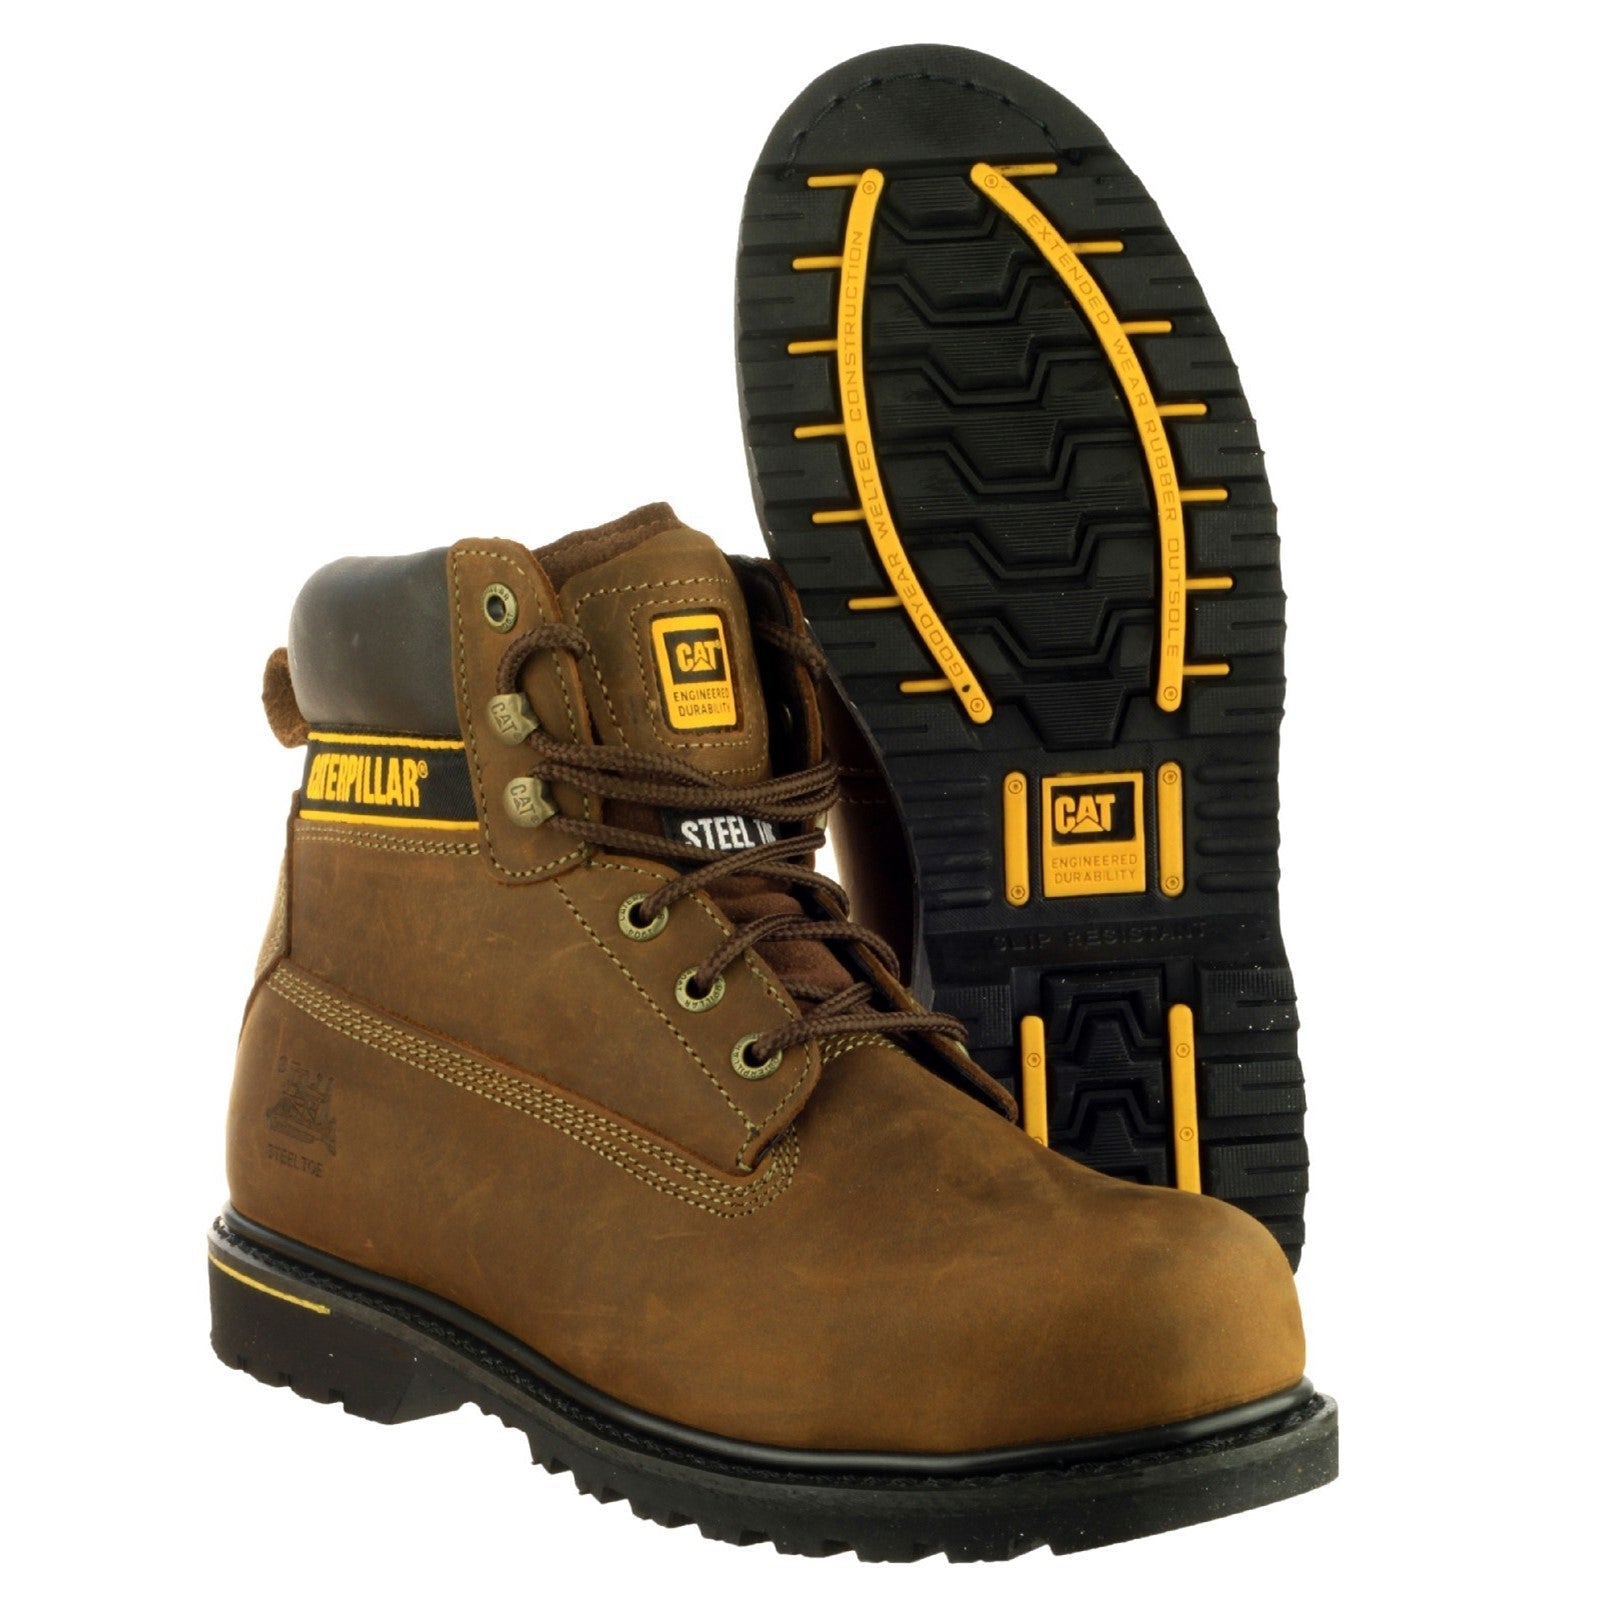 Caterpillar Holton S3 Safety Boot in Brown 